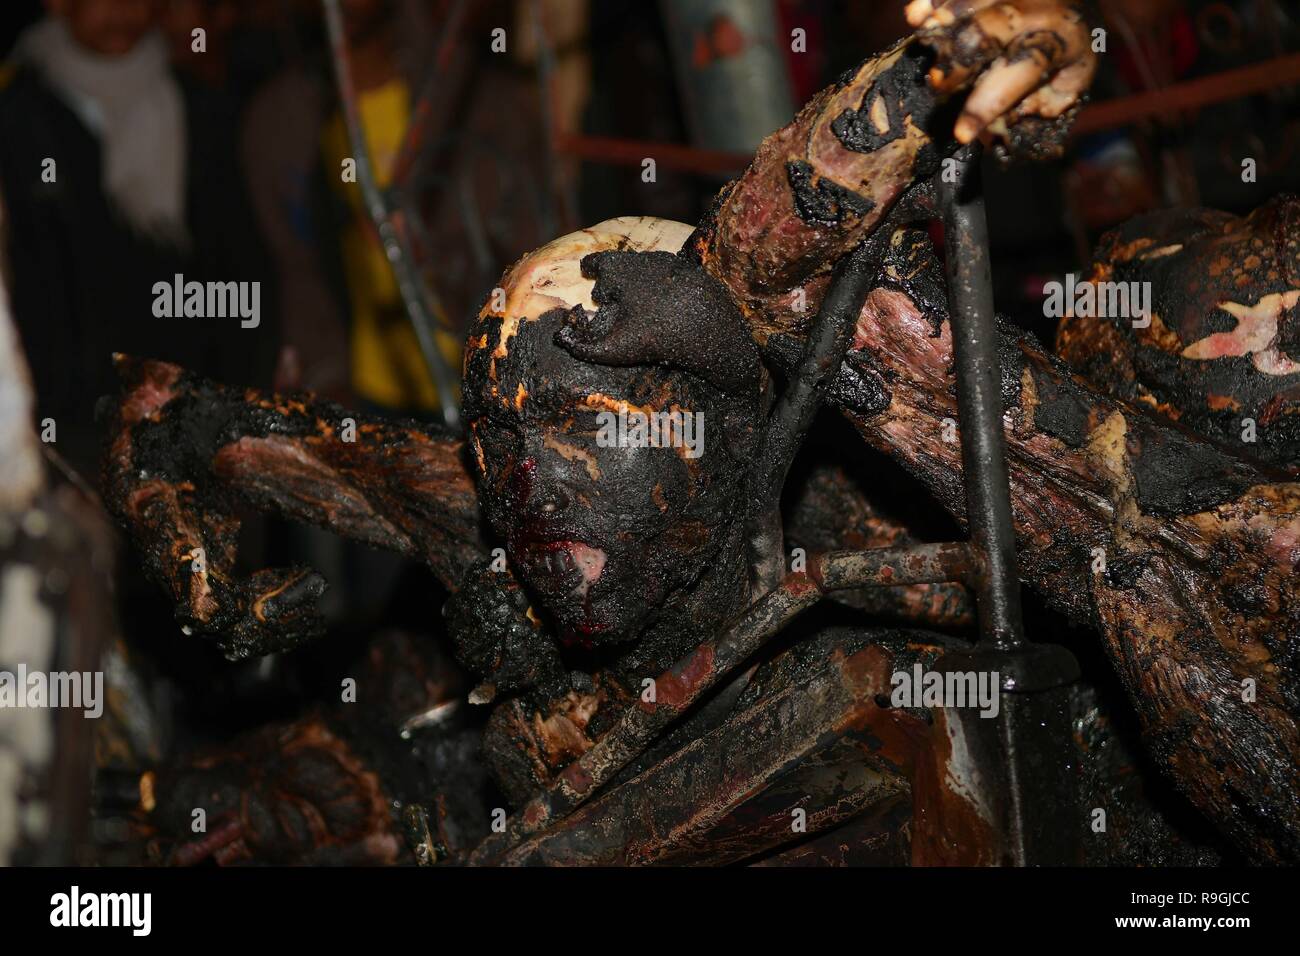 Agartala, Tripura, India. 22nd Dec, 2018. (EDITOR'S NOTE: IMAGE DEPICTS DEATH).Burnt bodies seen at the scene of the accident.Tragic road mishap at Amtali, 3 charred to death, 4 injured when two vehicles crushed face on resulting into a fire. Credit: Abhisek Saha/SOPA Images/ZUMA Wire/Alamy Live News Stock Photo